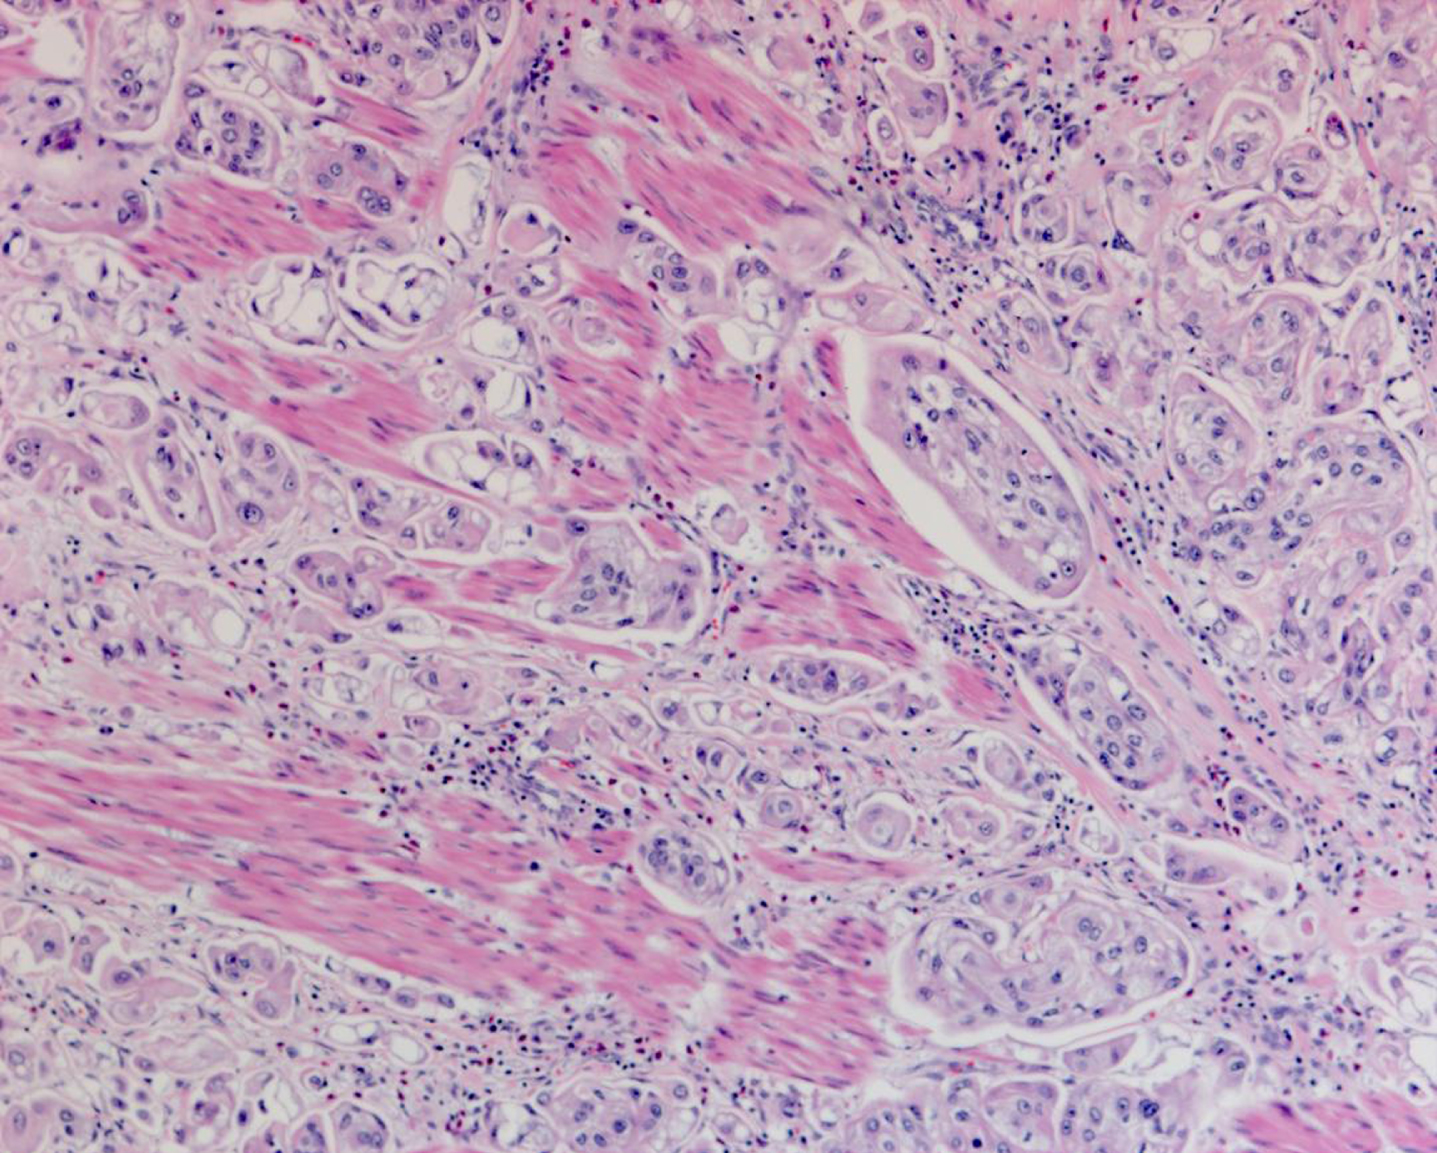 Pathology demonstrating the extensive carcinoma in situ as well as the high grade urothelial carcinoma with a prominent micropapillary pattern. The cancer invaded through the muscularis propria into the perivesical fat.